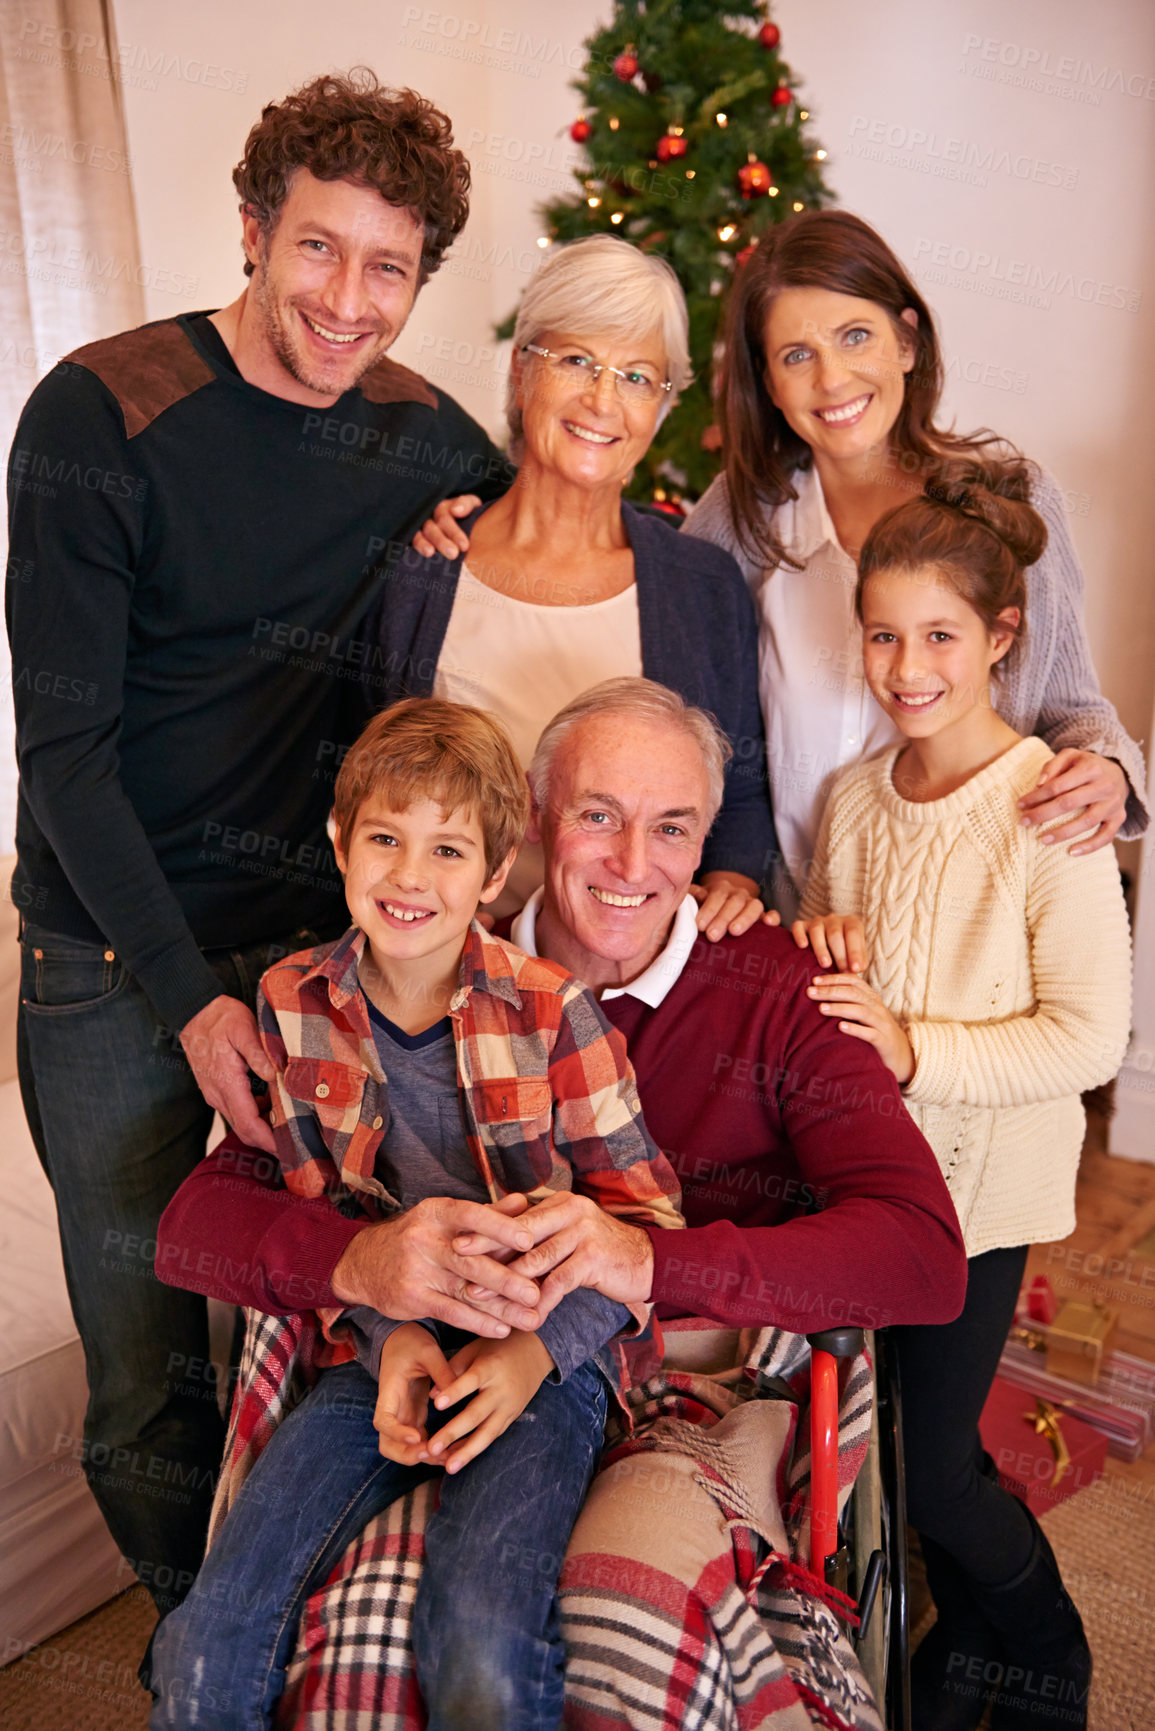 Buy stock photo Christmas, happy and big family portrait in home with young children, parents and grandparents. Happiness, love and festive holiday celebration with kids, grandma and grandpa together in house.